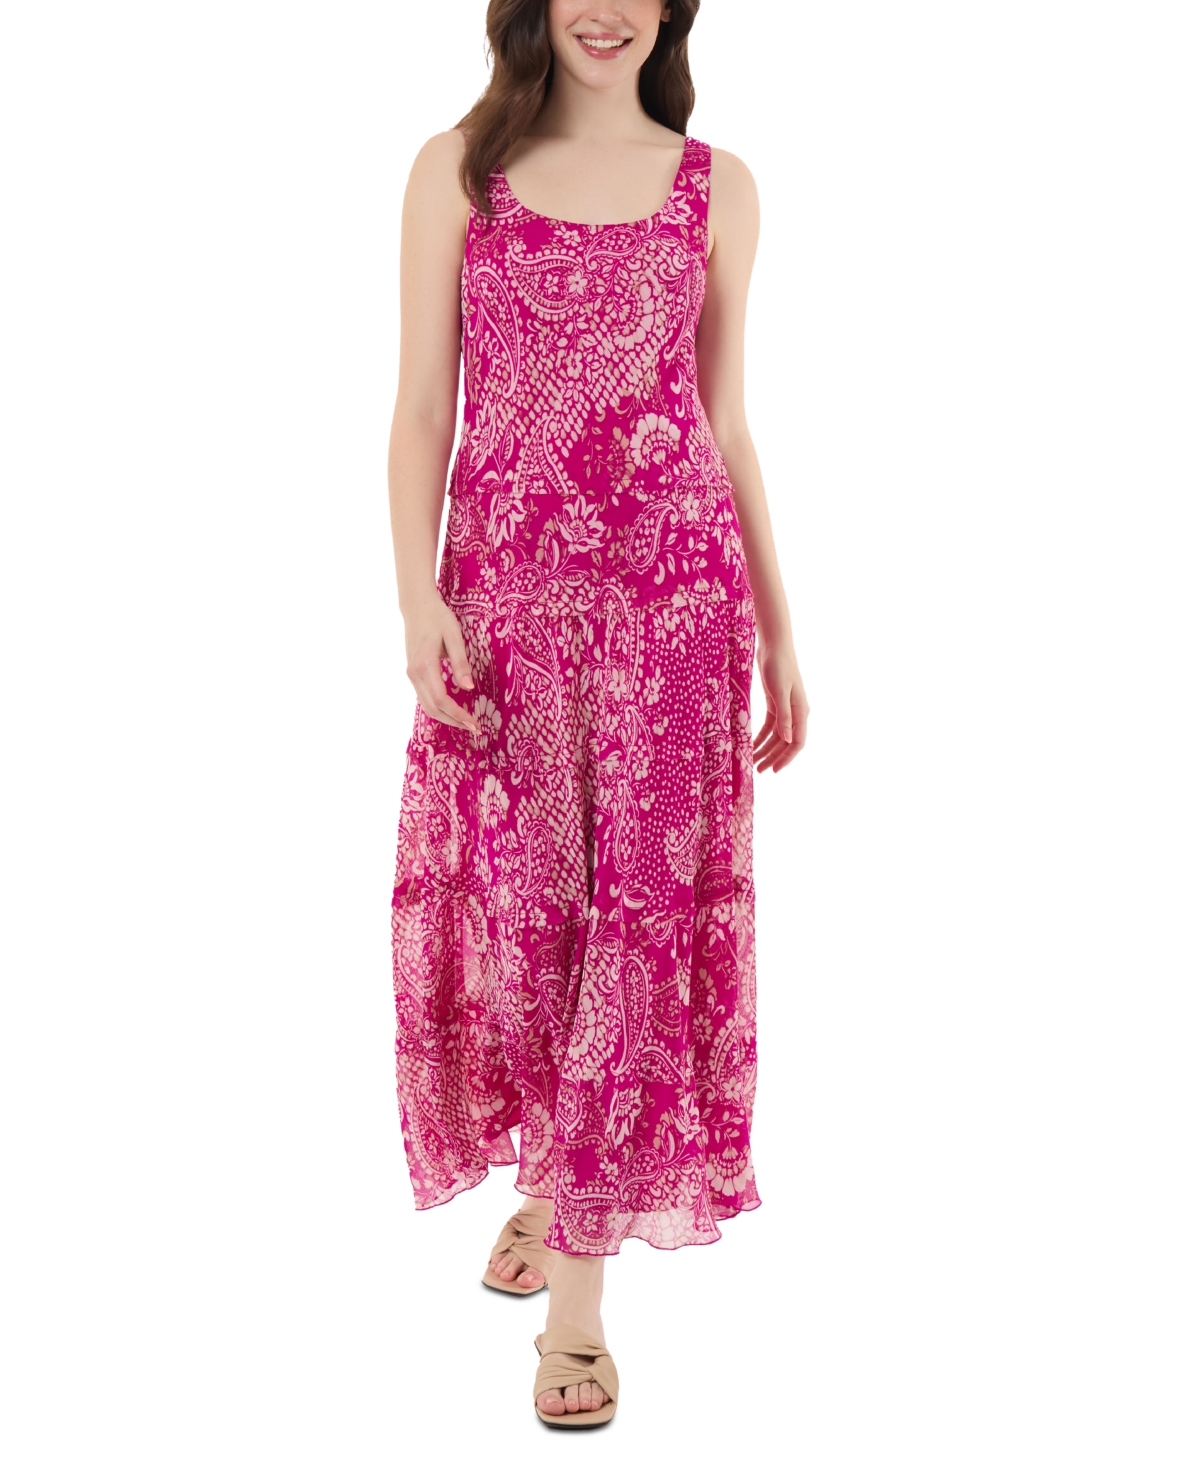 Women's Printed Tiered Sleeveless Dress - Bright Orchid